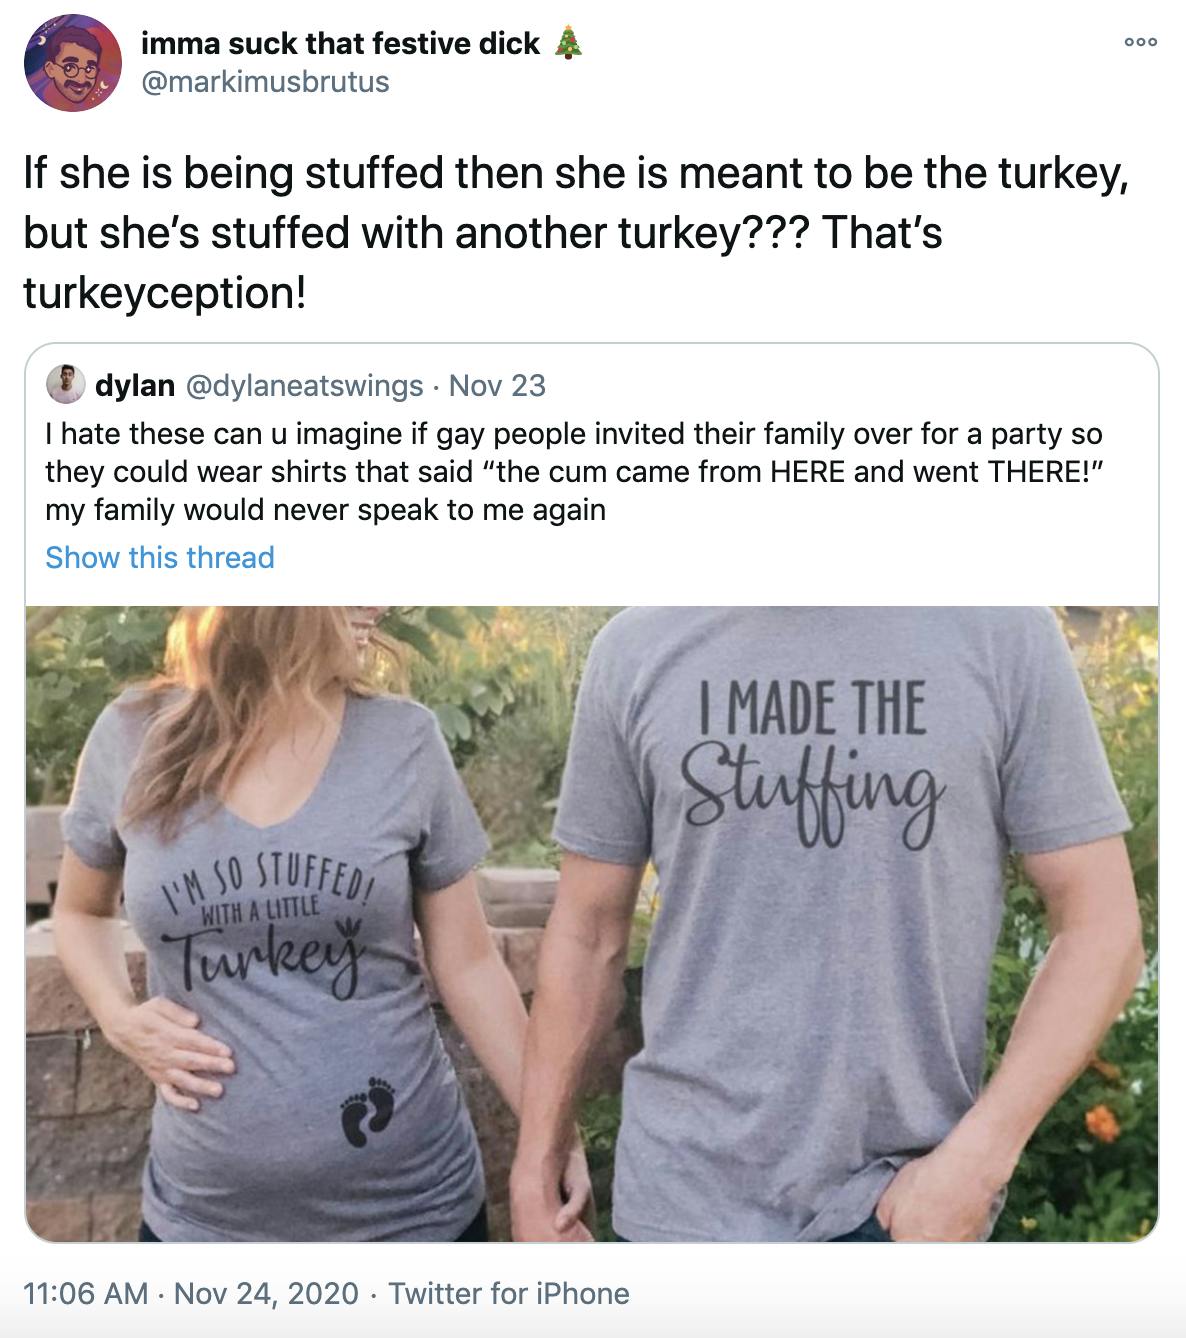 If she is being stuffed then she is meant to be the turkey, but she’s stuffed with another turkey??? That’s turkeyception!